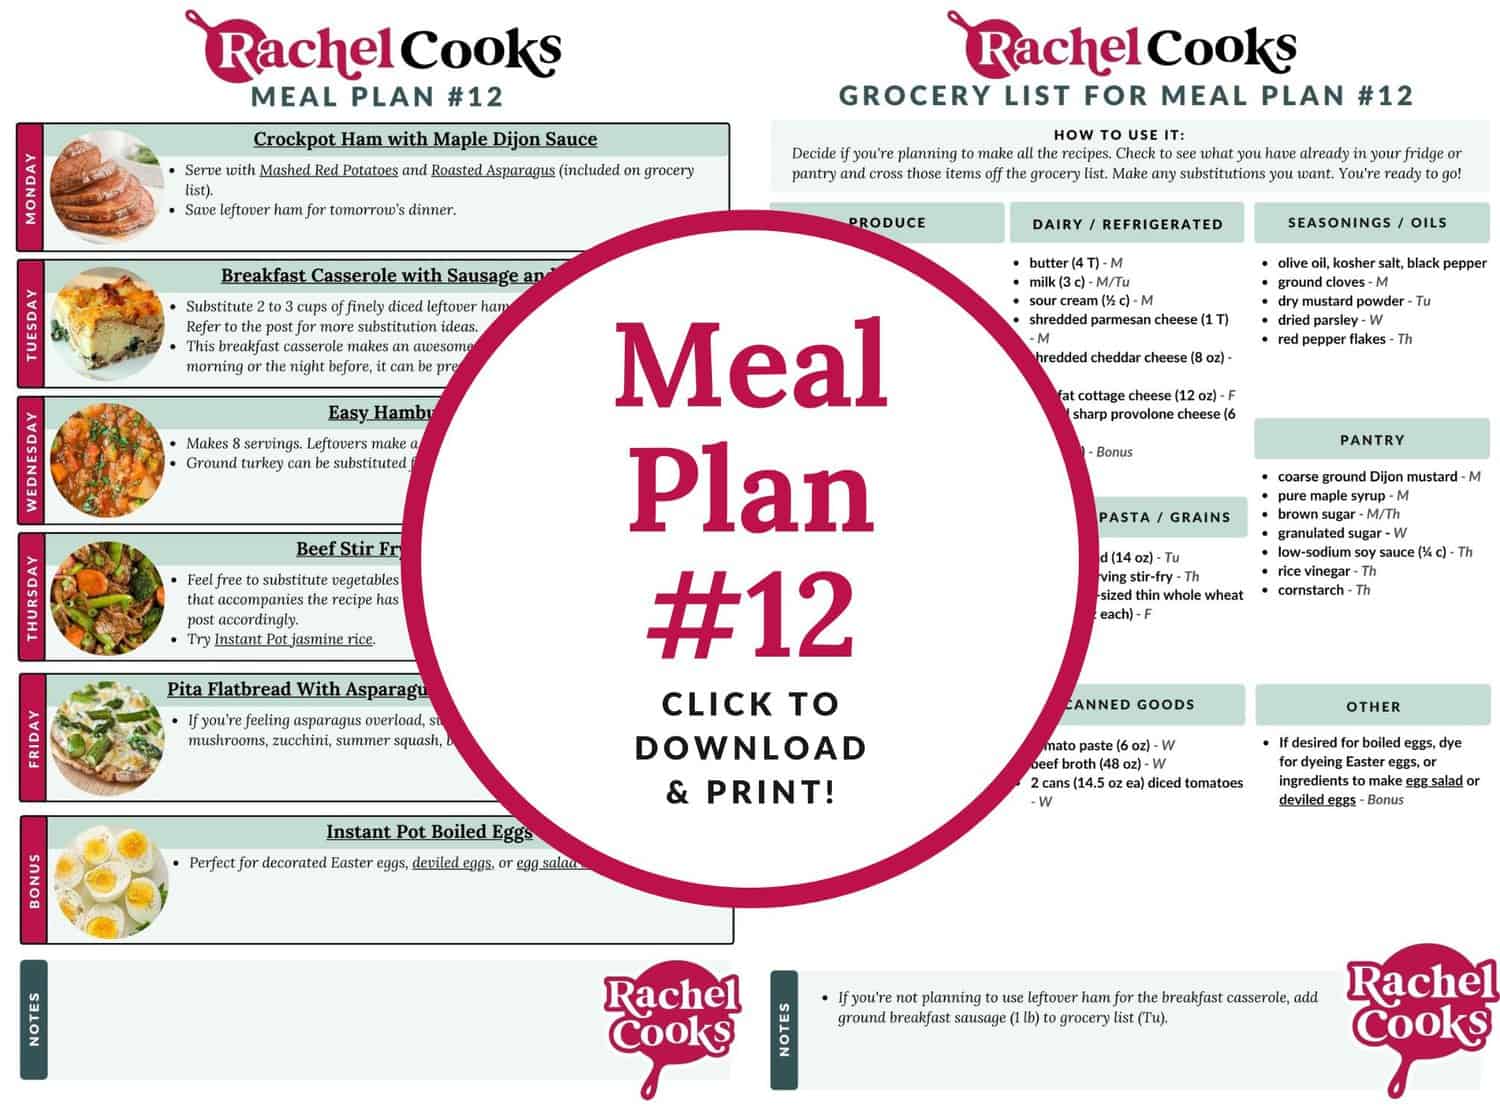 Meal plan preview image.